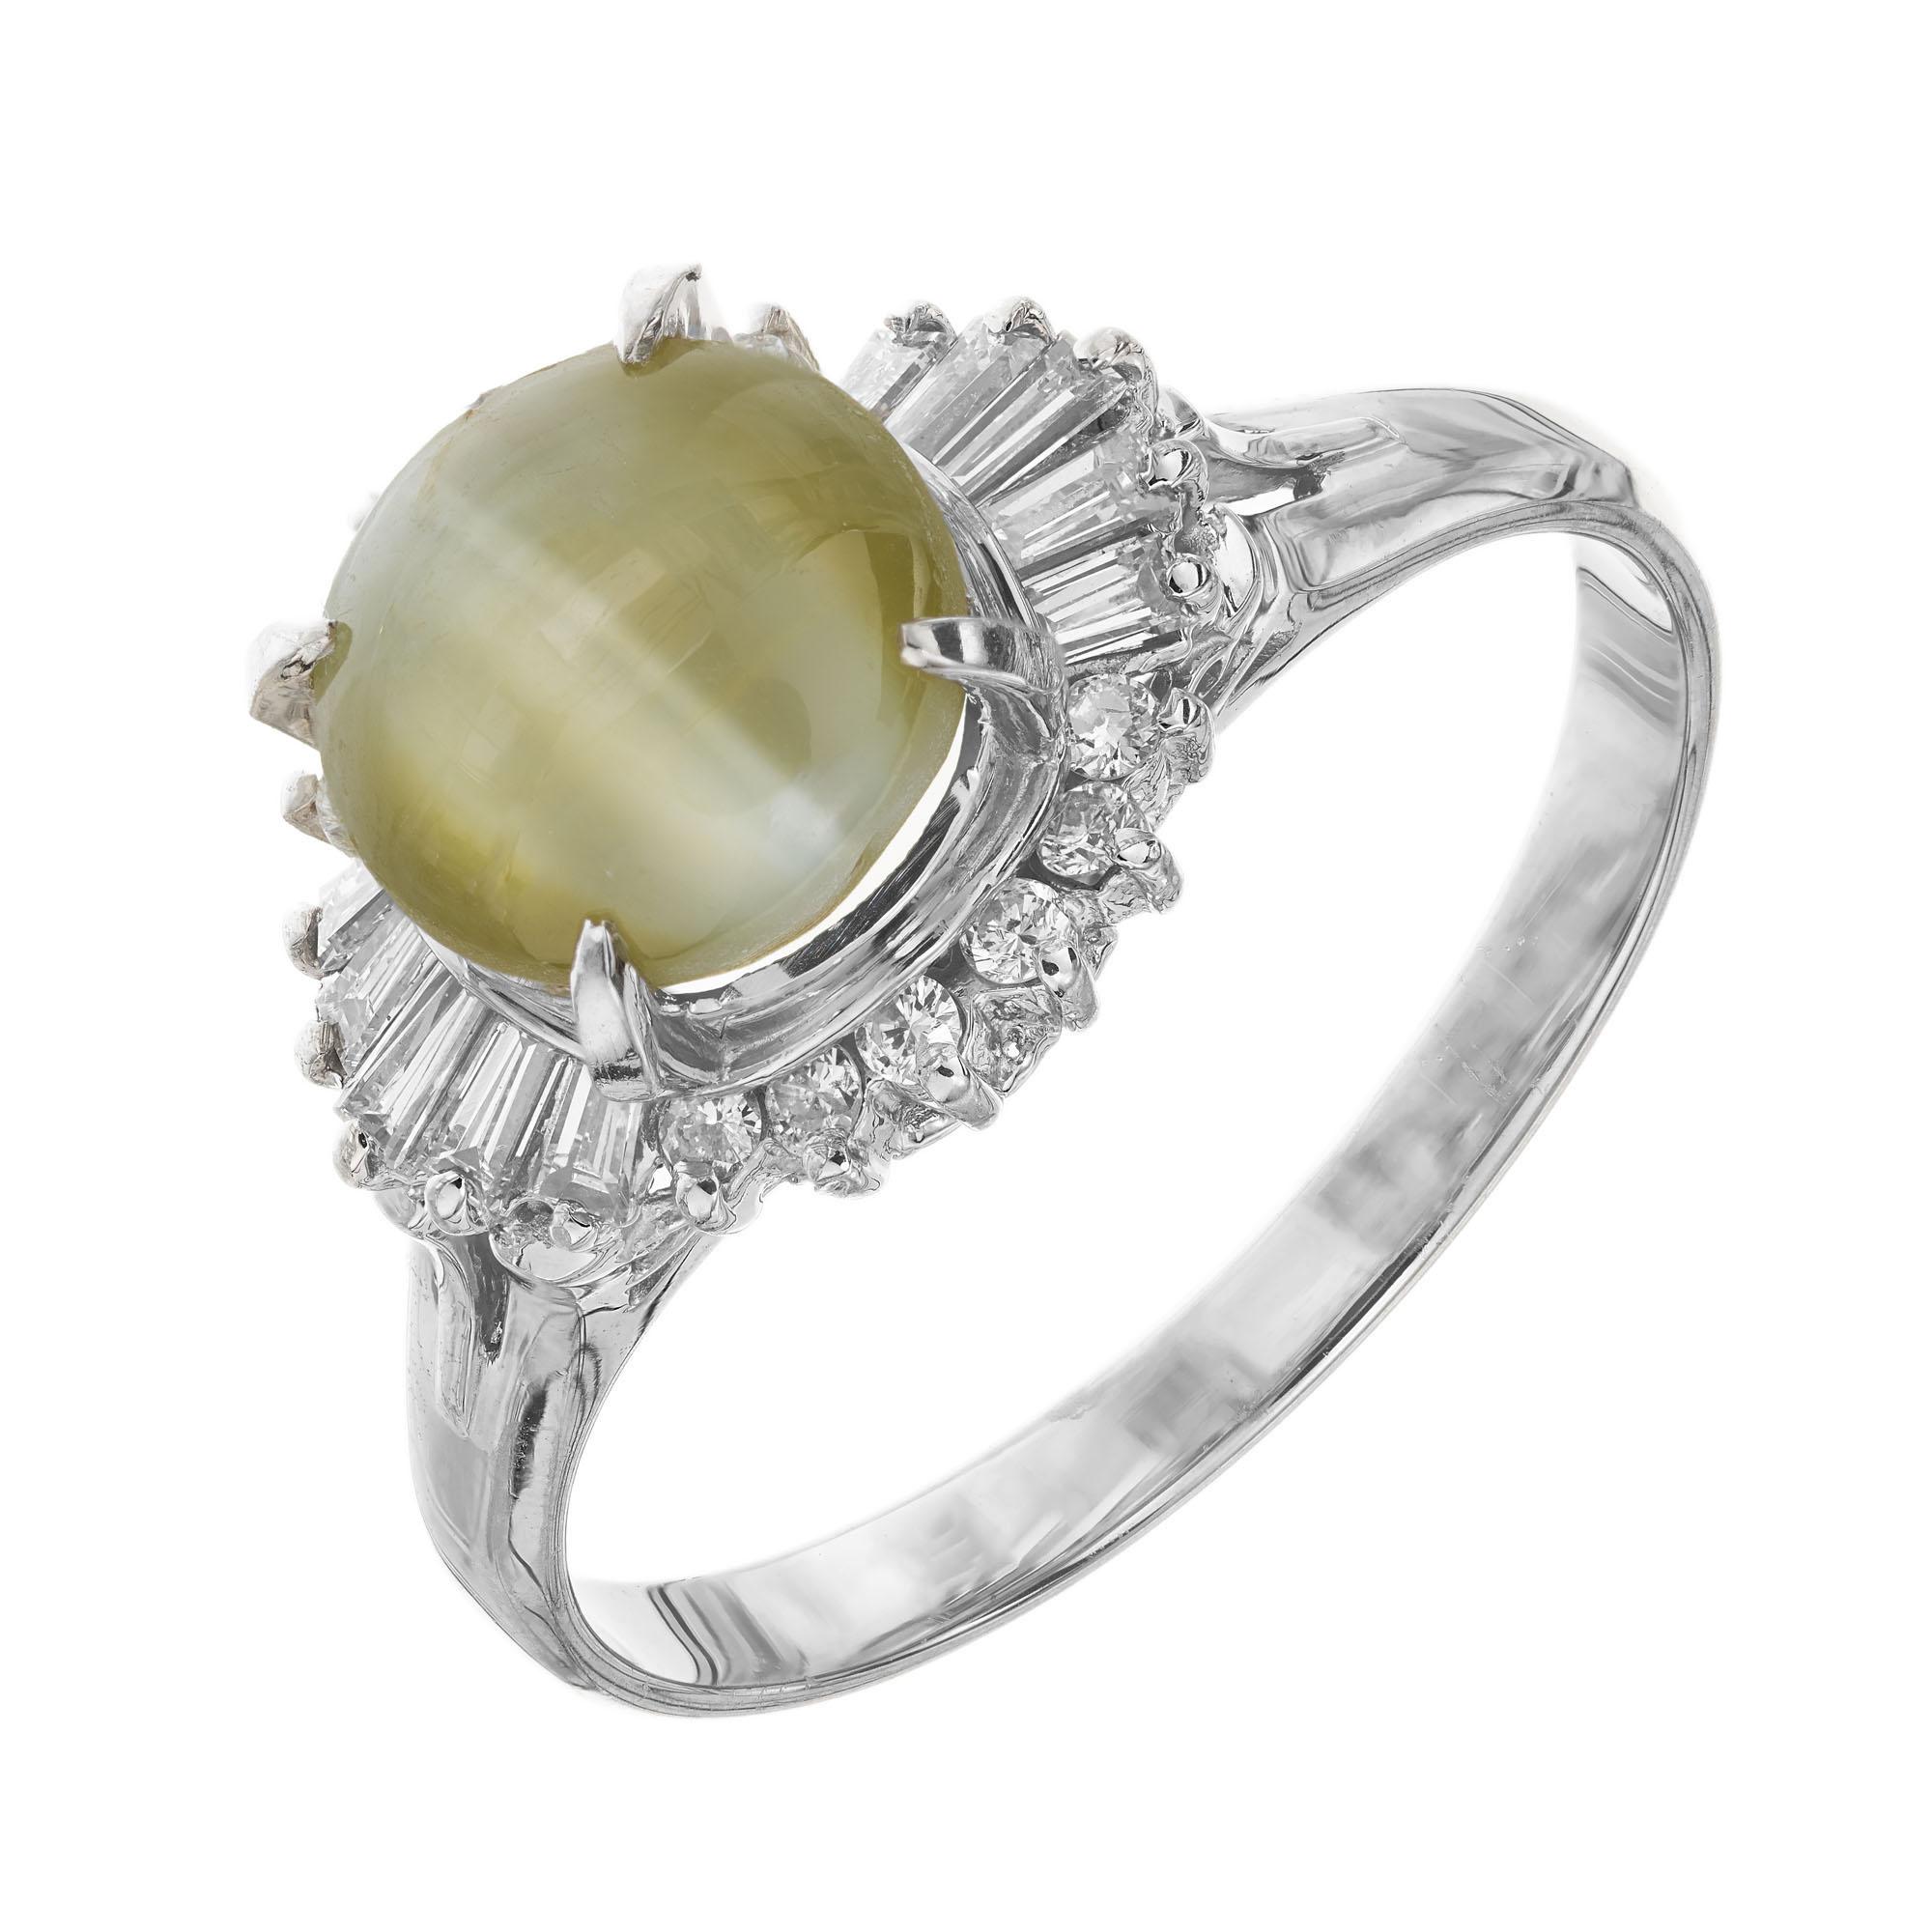 Chrysoberyl cats eye and diamond engagement ring. GIA certified oval chrysoberyl center stone with a halo of baguette and round brilliant cut diamonds in a platinum setting.  

1 oval greenish yellow cats’ eye chrysoberyl, approx. 3.69cts GIA